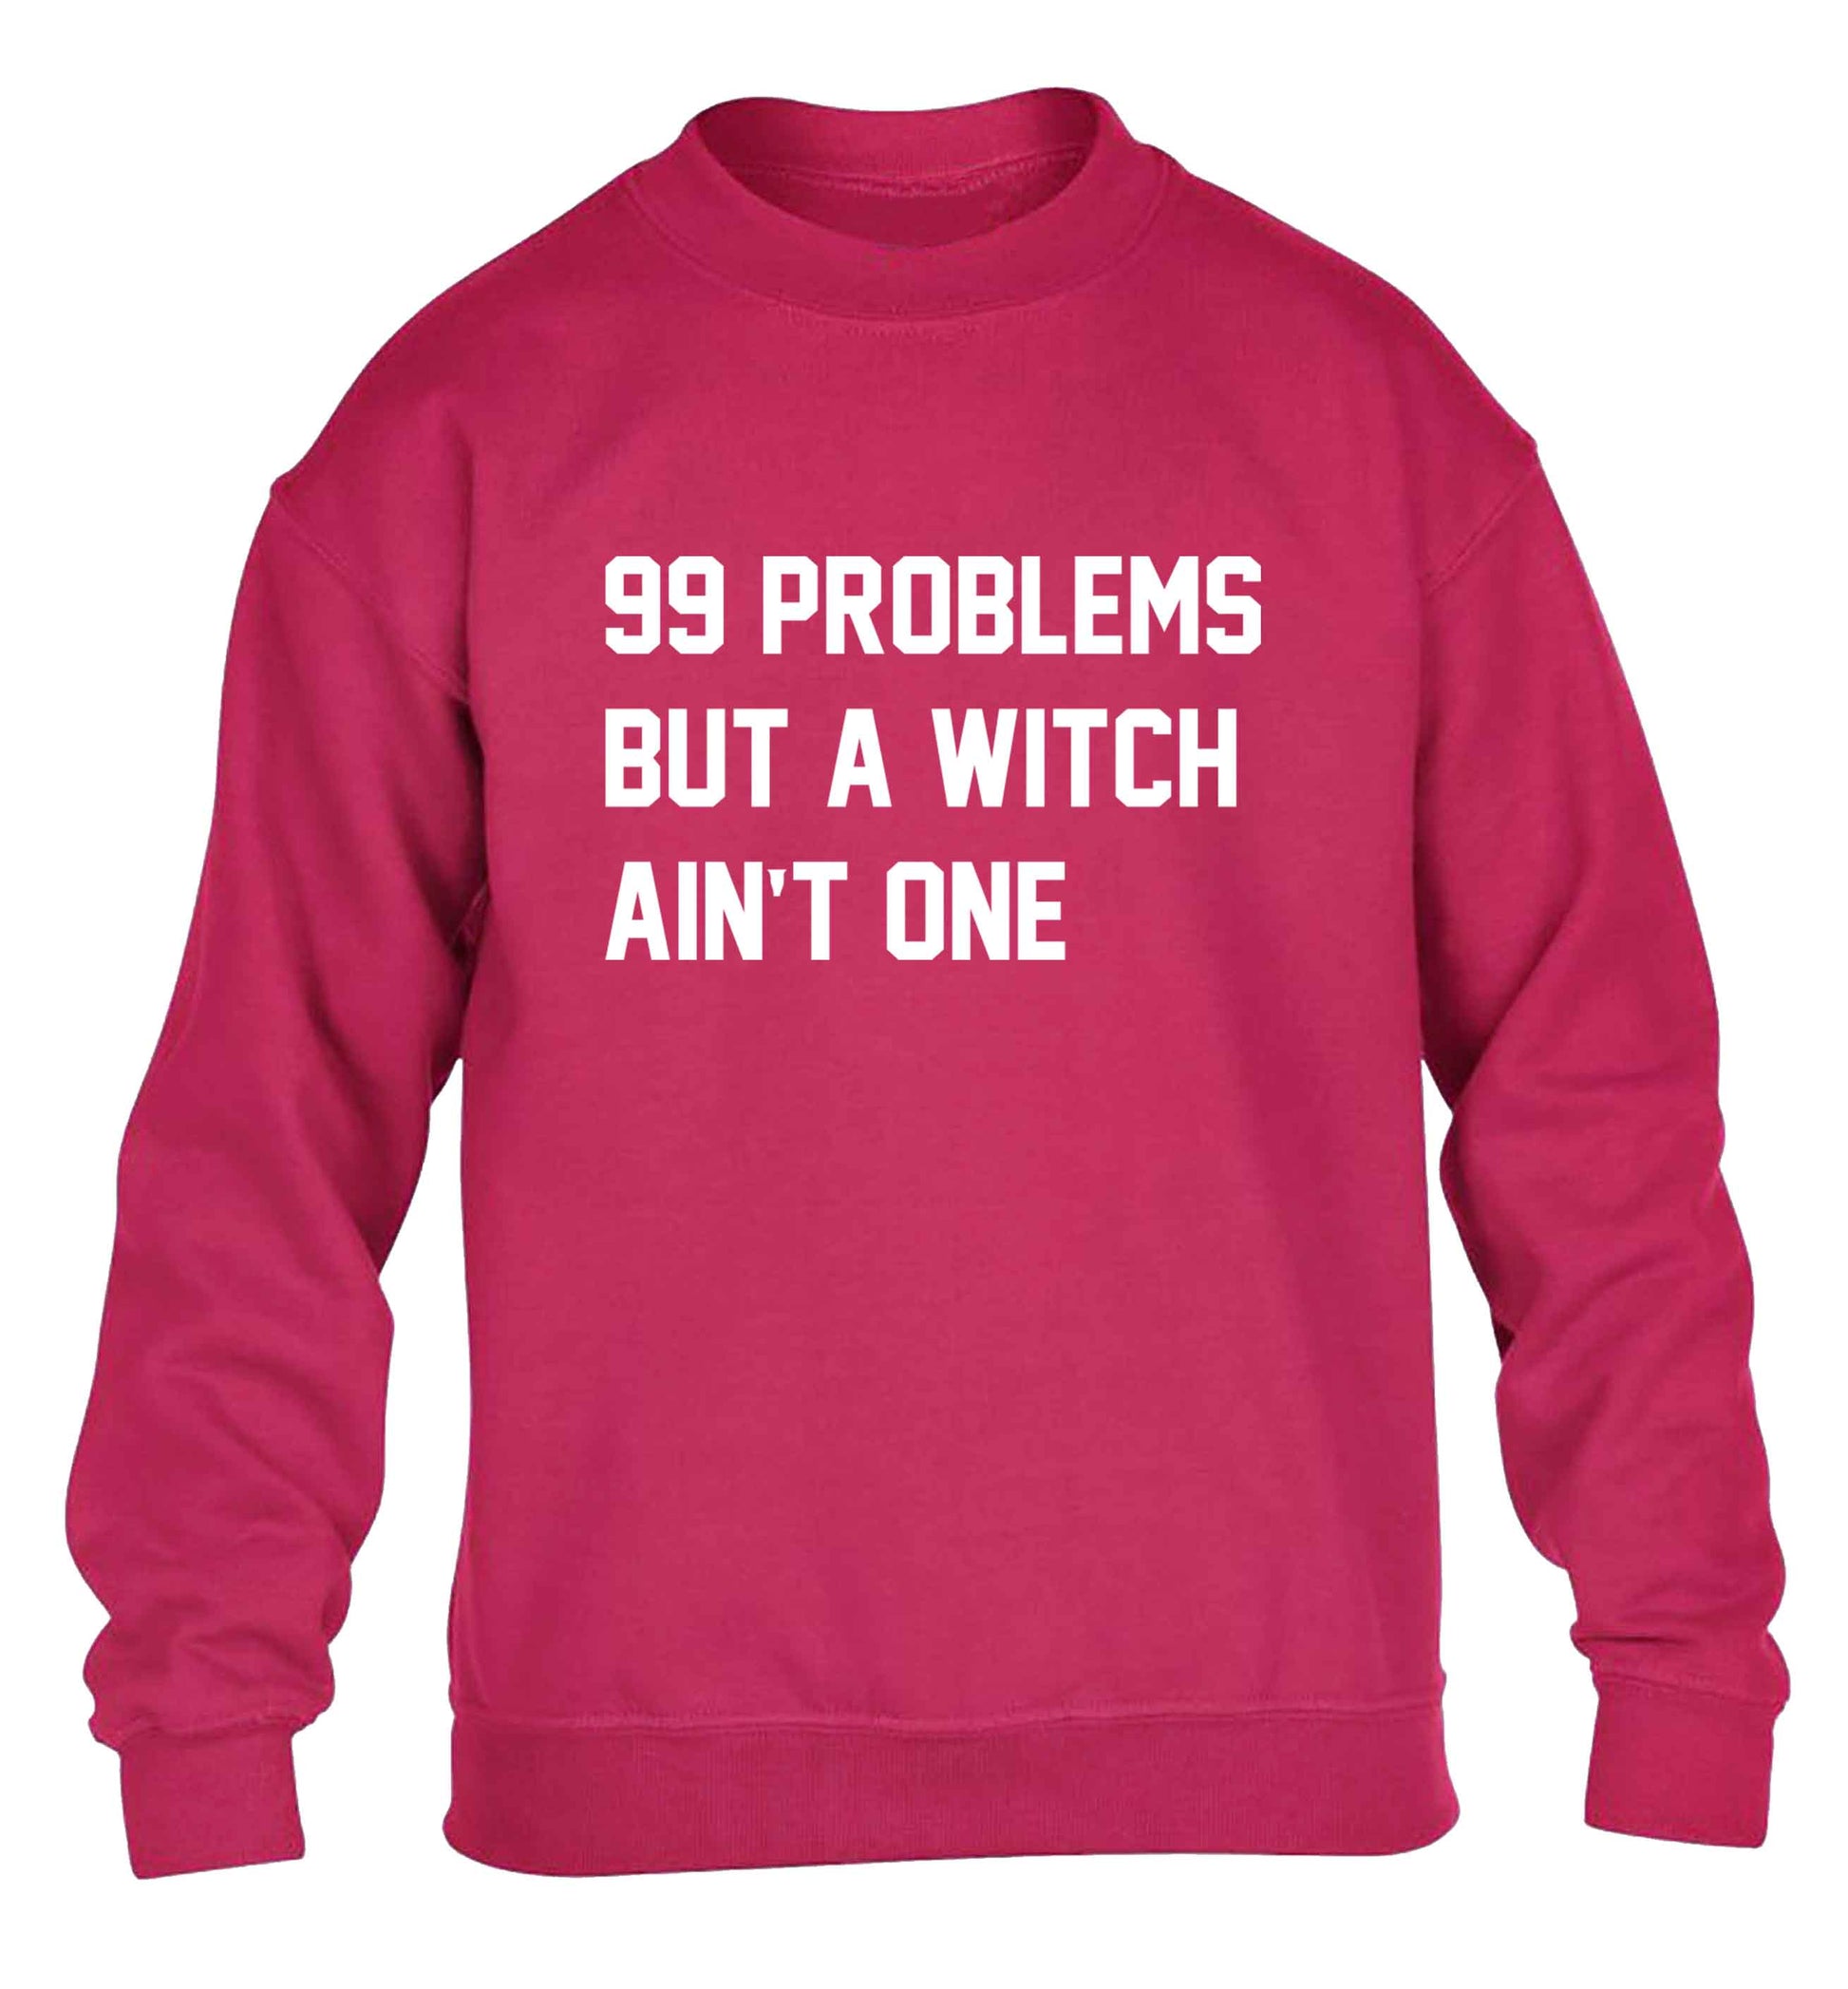 99 Problems but a witch aint one children's pink sweater 12-13 Years